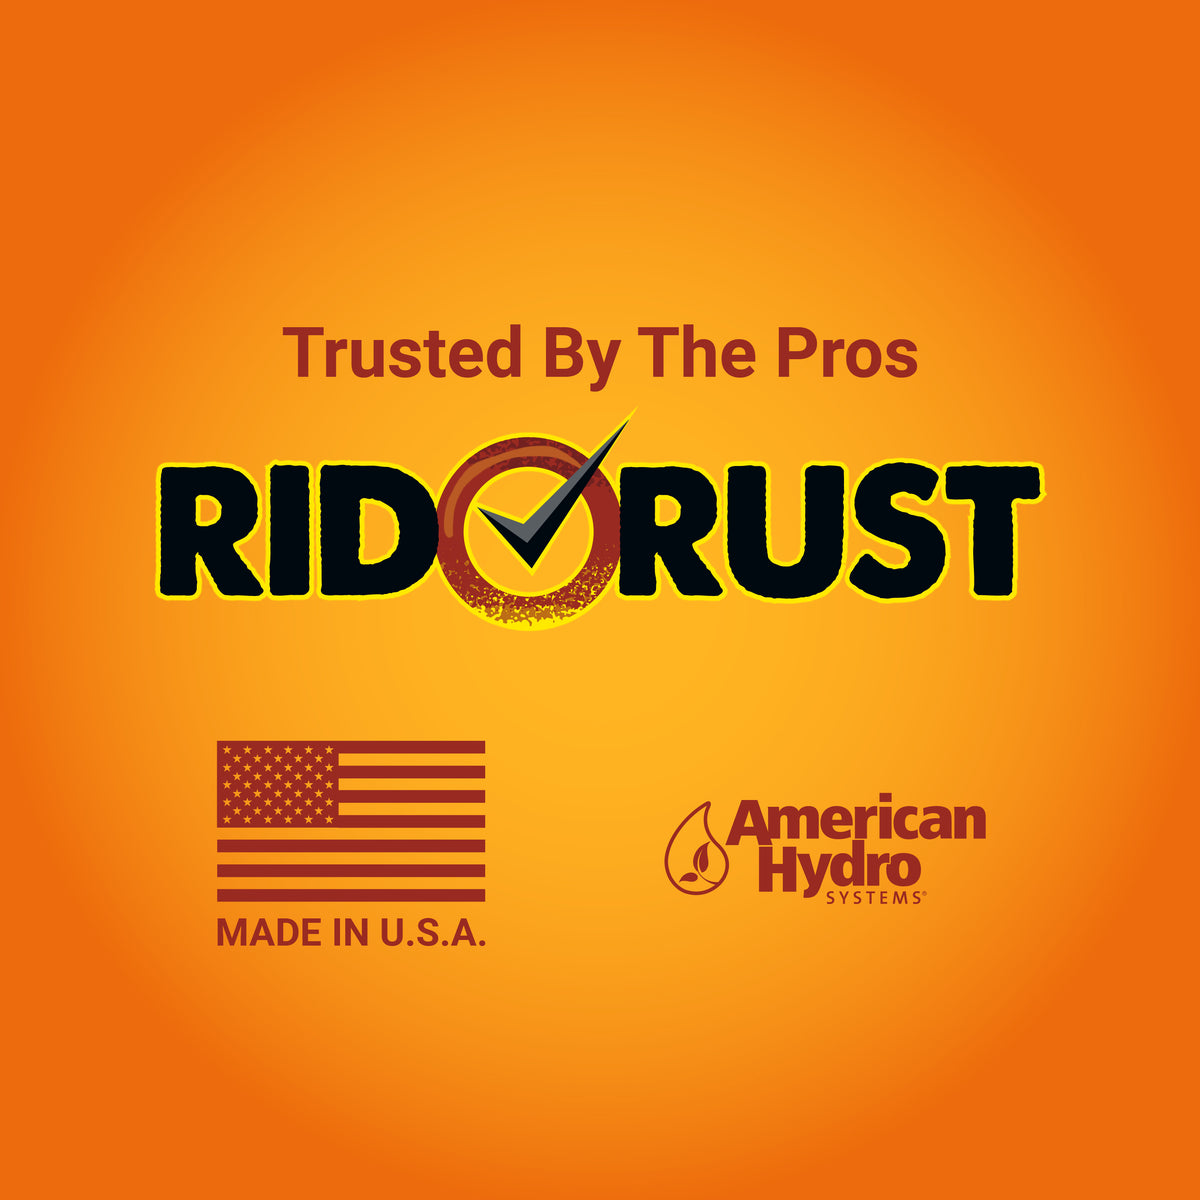 American Hydro Systems 1570522 64 oz Rid-O Rust Preventer - Pack of 4, 1 -  Harris Teeter